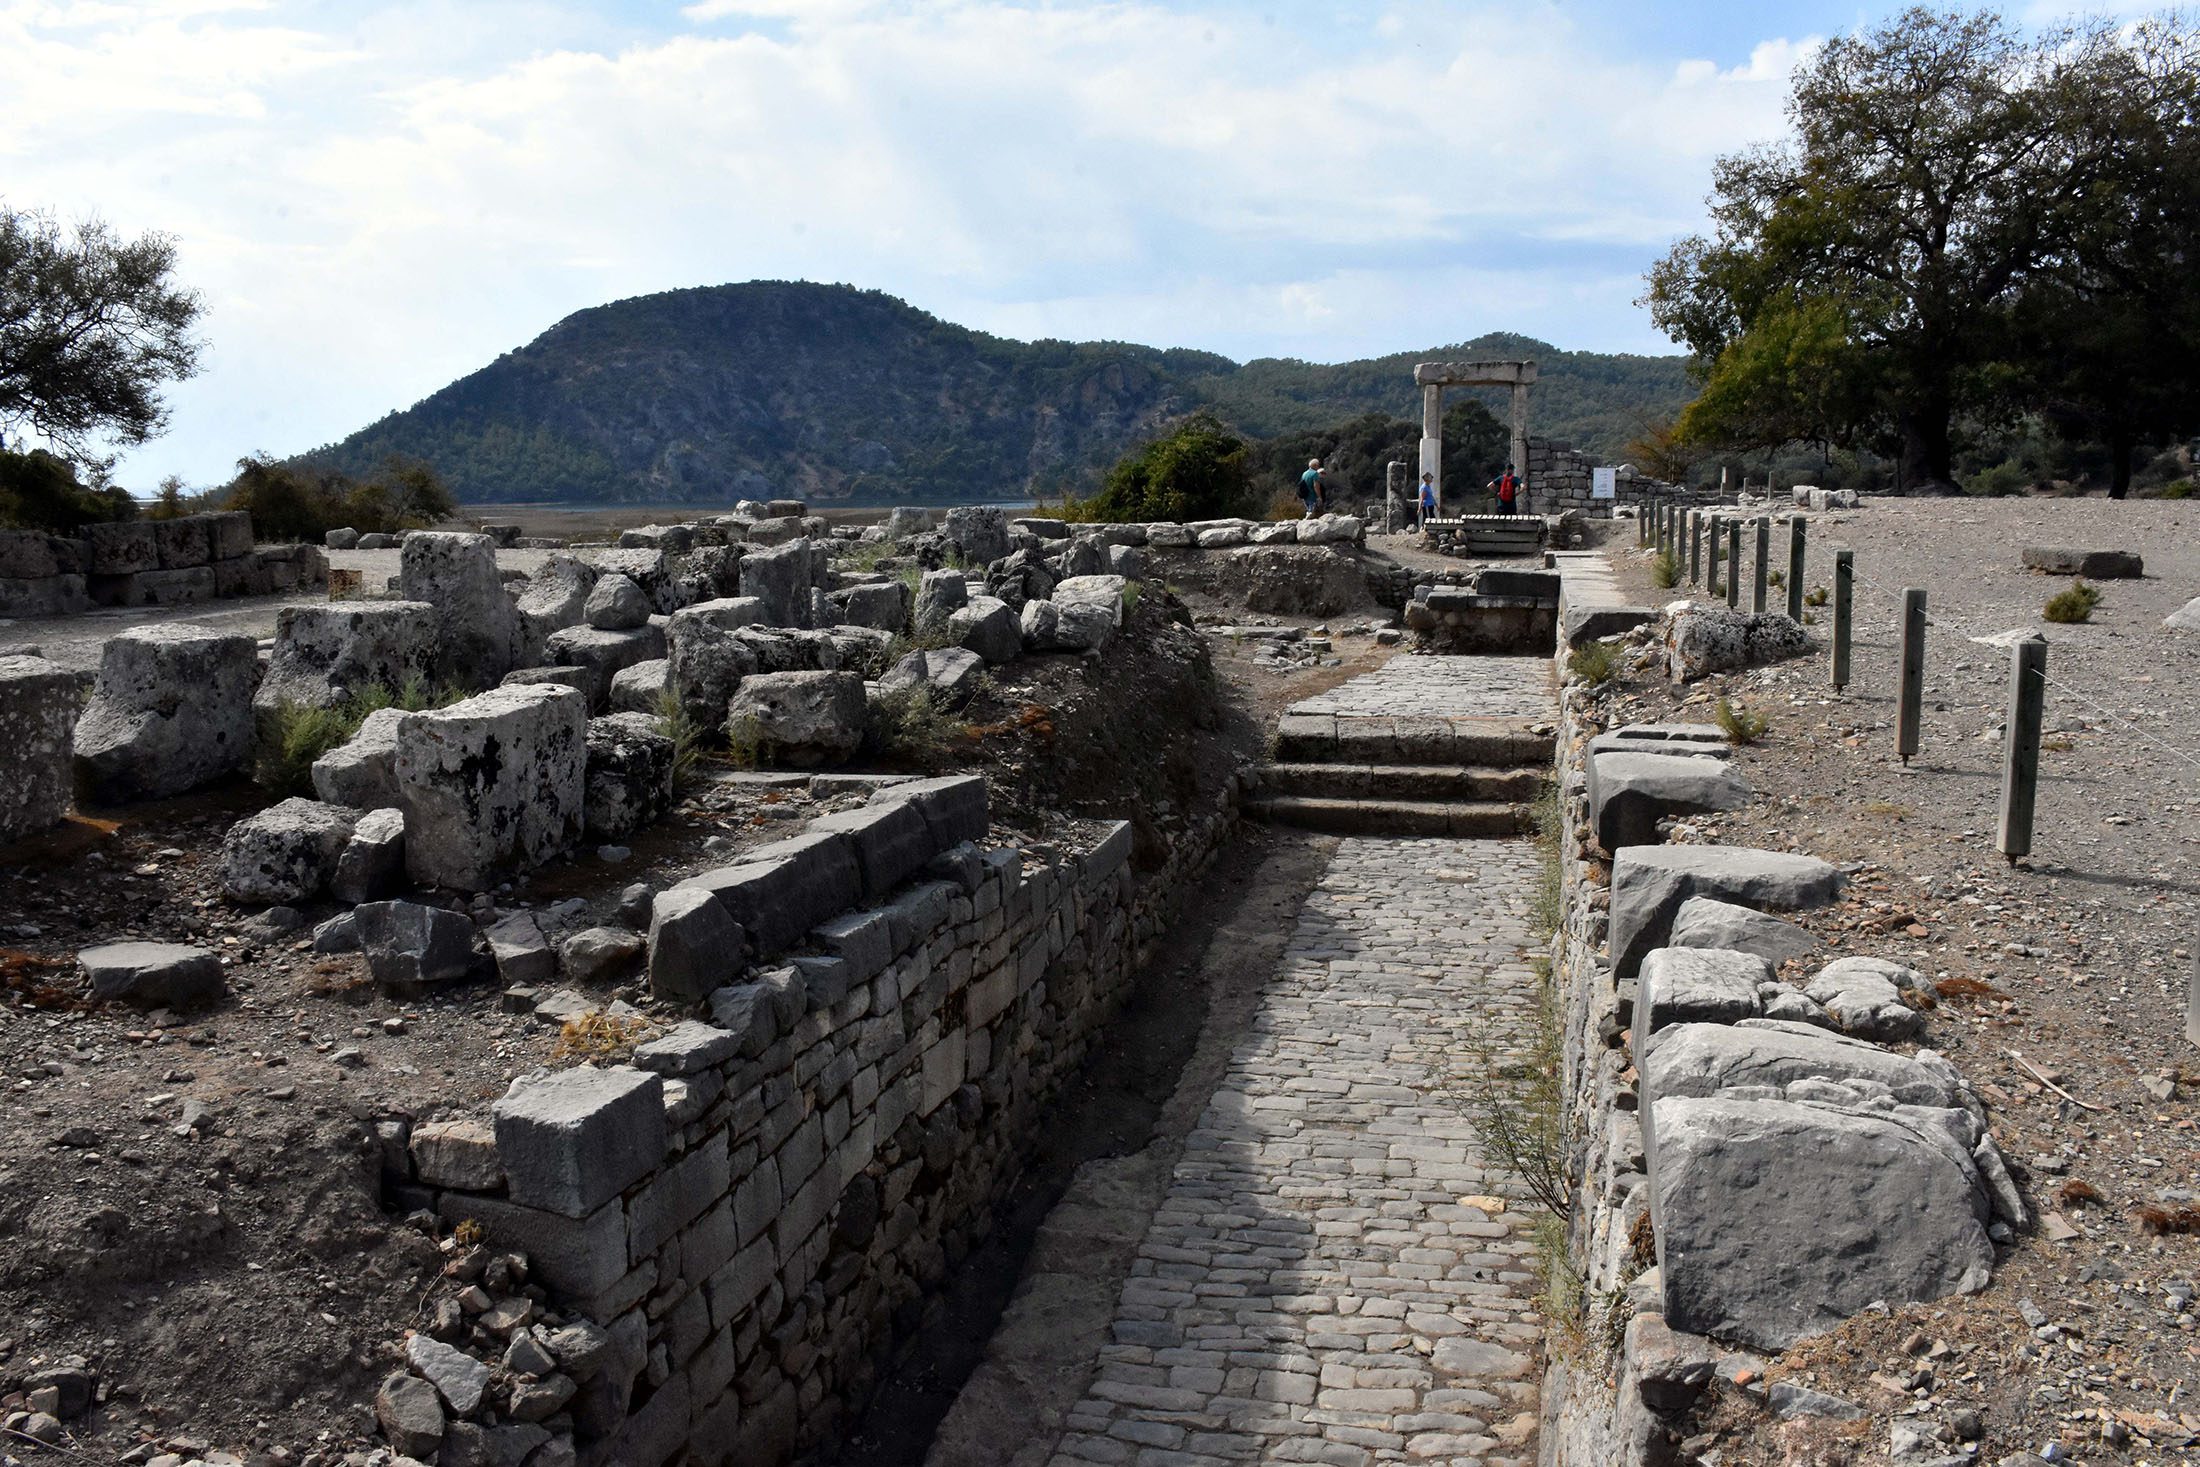 Byzantine church, tombs unearthed in ancient city of Kaunos in Turkey